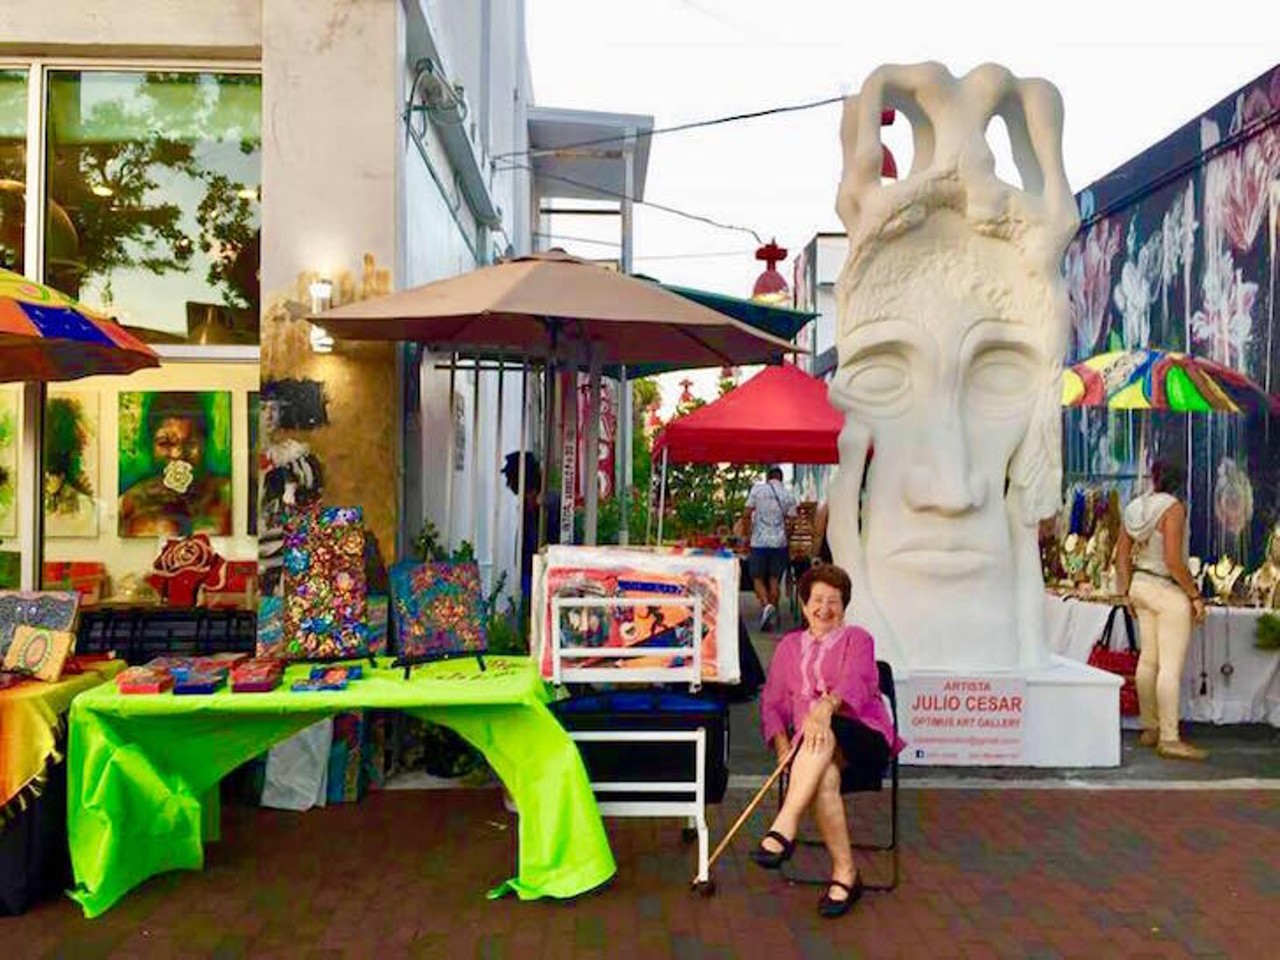 Experience Cuban culture in Little Havana
Estimated driving distance from Orlando: 3 hours 45 minutes 
Described as a &#147;vibrant Cuban neighborhood", Little Havana in Miami will submerge you in the Cuban culture with its authentic eateries, shopping spots, entertainment, and of course, coffee shops. Skip the chaos of South Beach and hit the streets of Little Havana instead. 
Photo via Little Havana Art District /Facebook